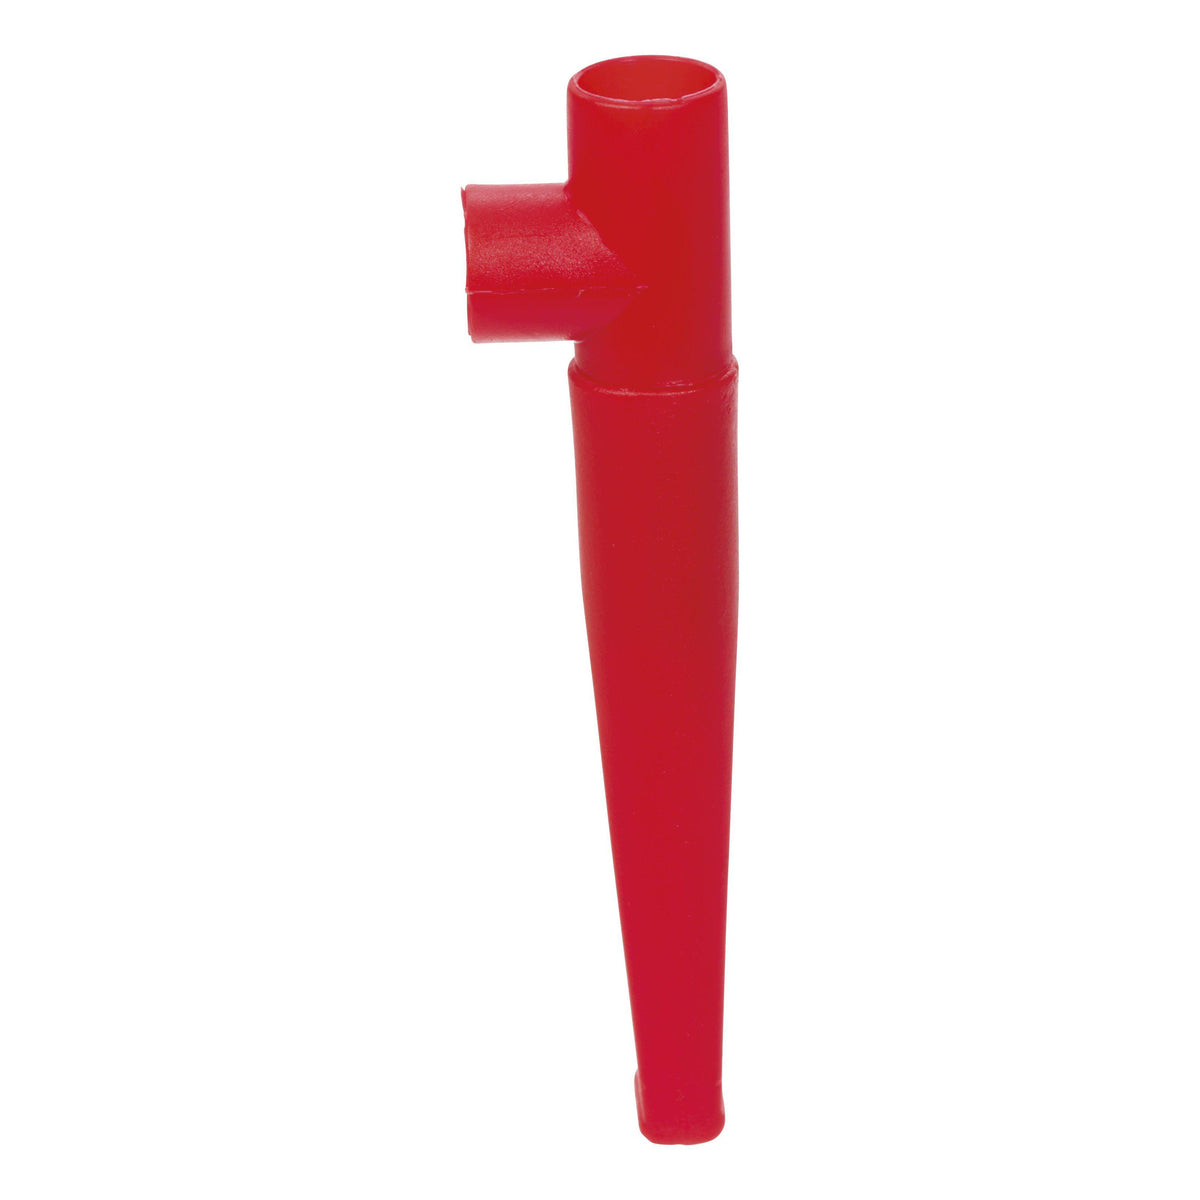 Front view of the mouthpiece used to blow plastic bubbles.